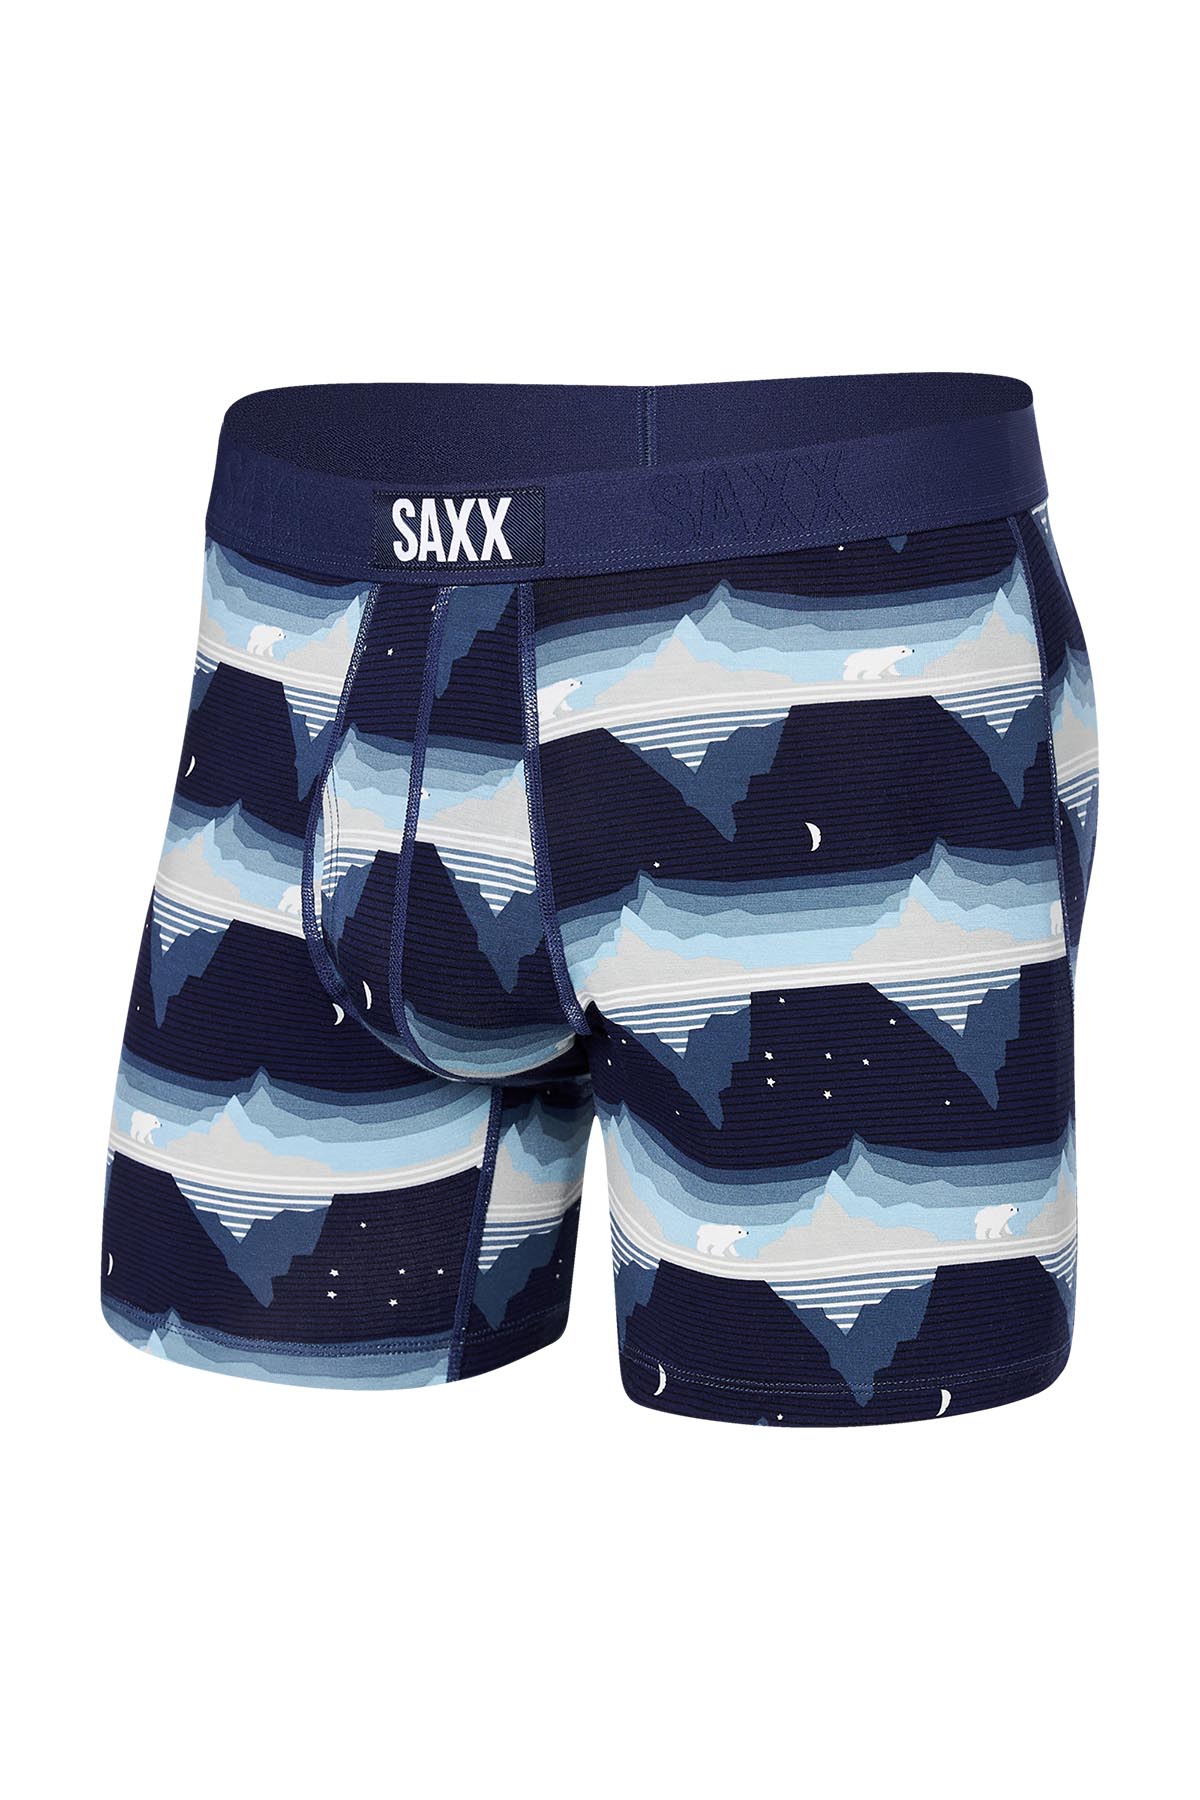 Saxx Ultra Boxer Brief w/ Fly | Go With The Floe Navy